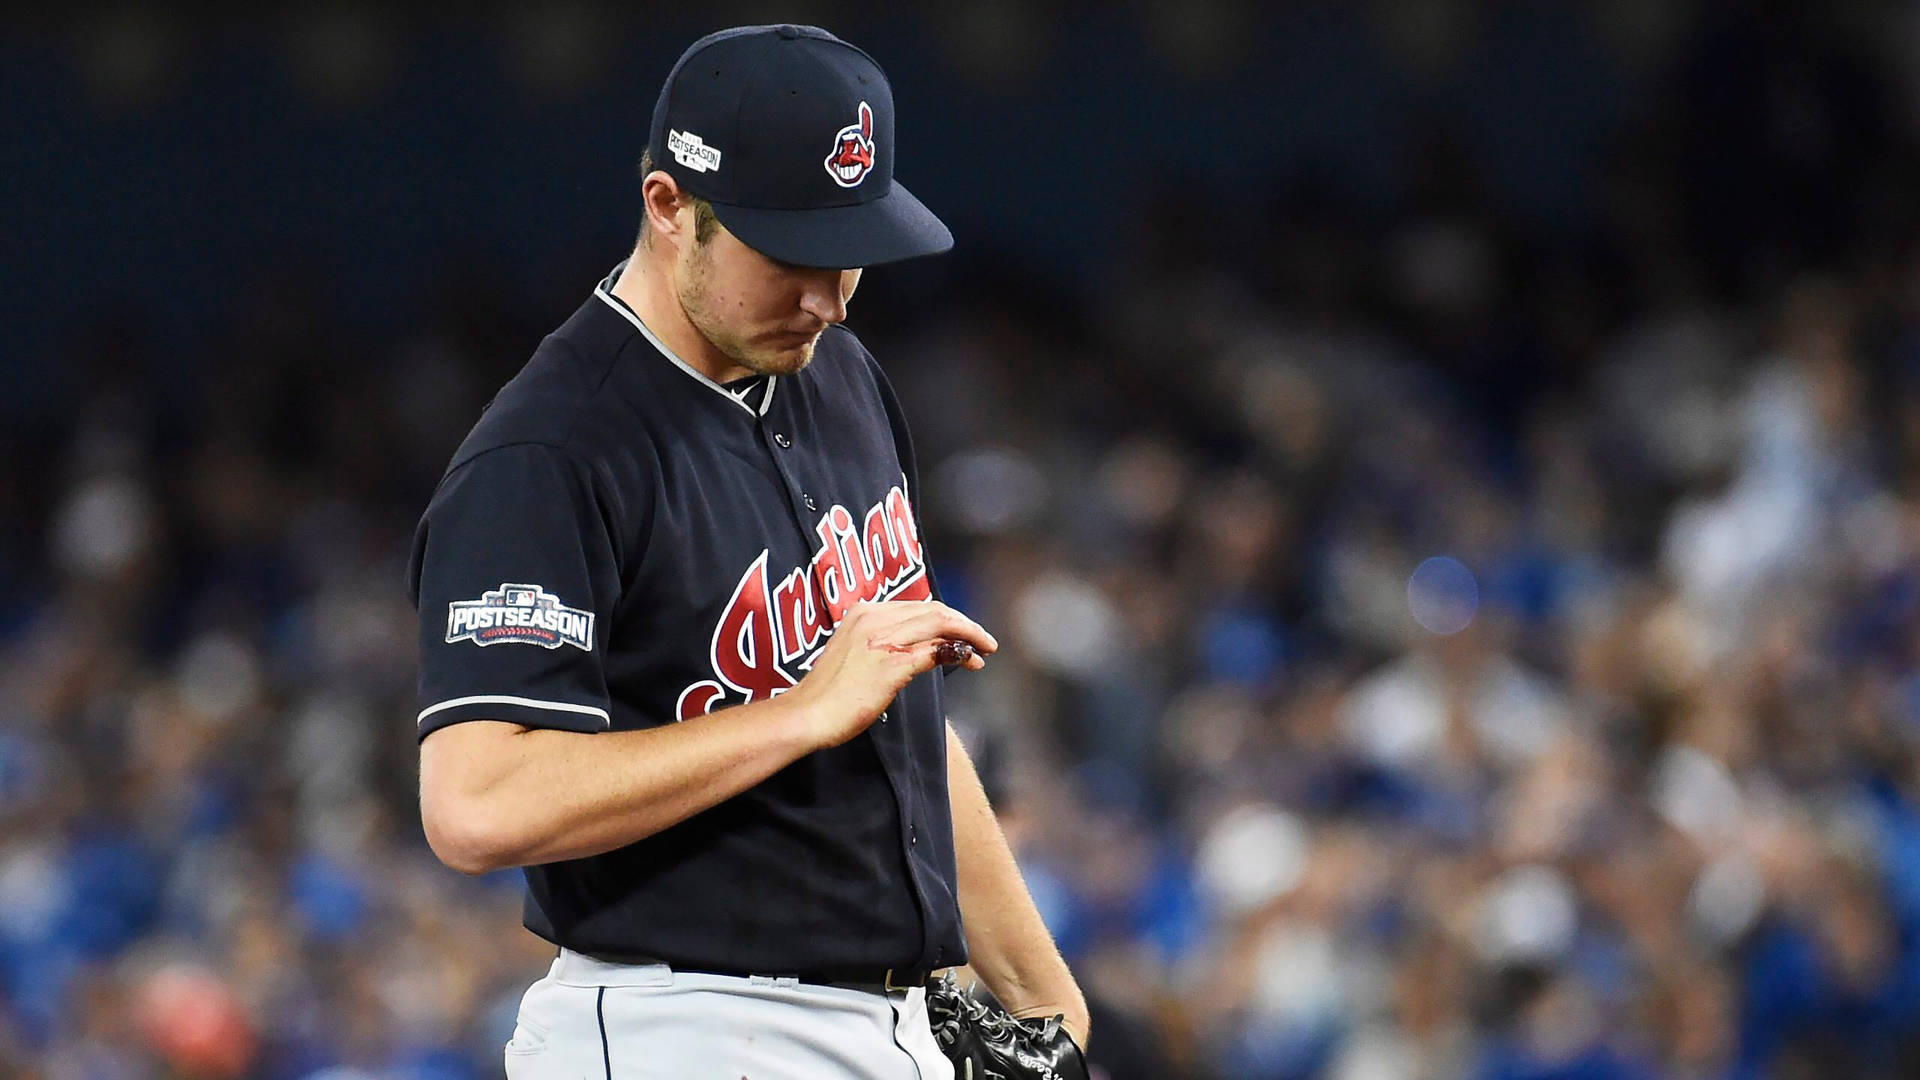 Trevor Bauer Looking At His Hand Background